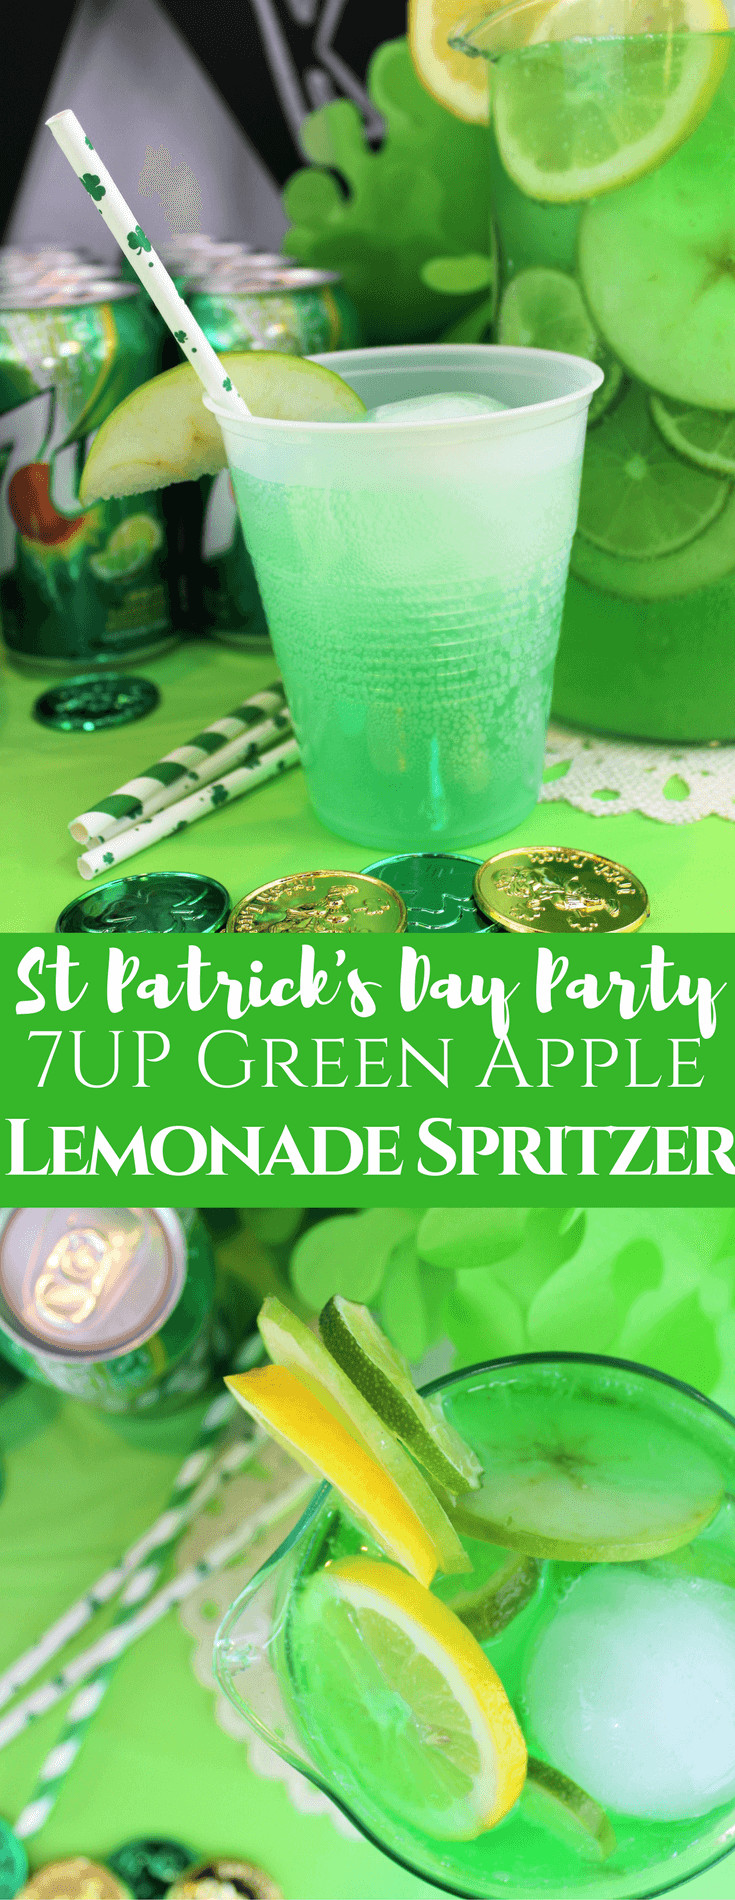 St Patrick's Day Party Food
 St Patrick s Day Party Recipes